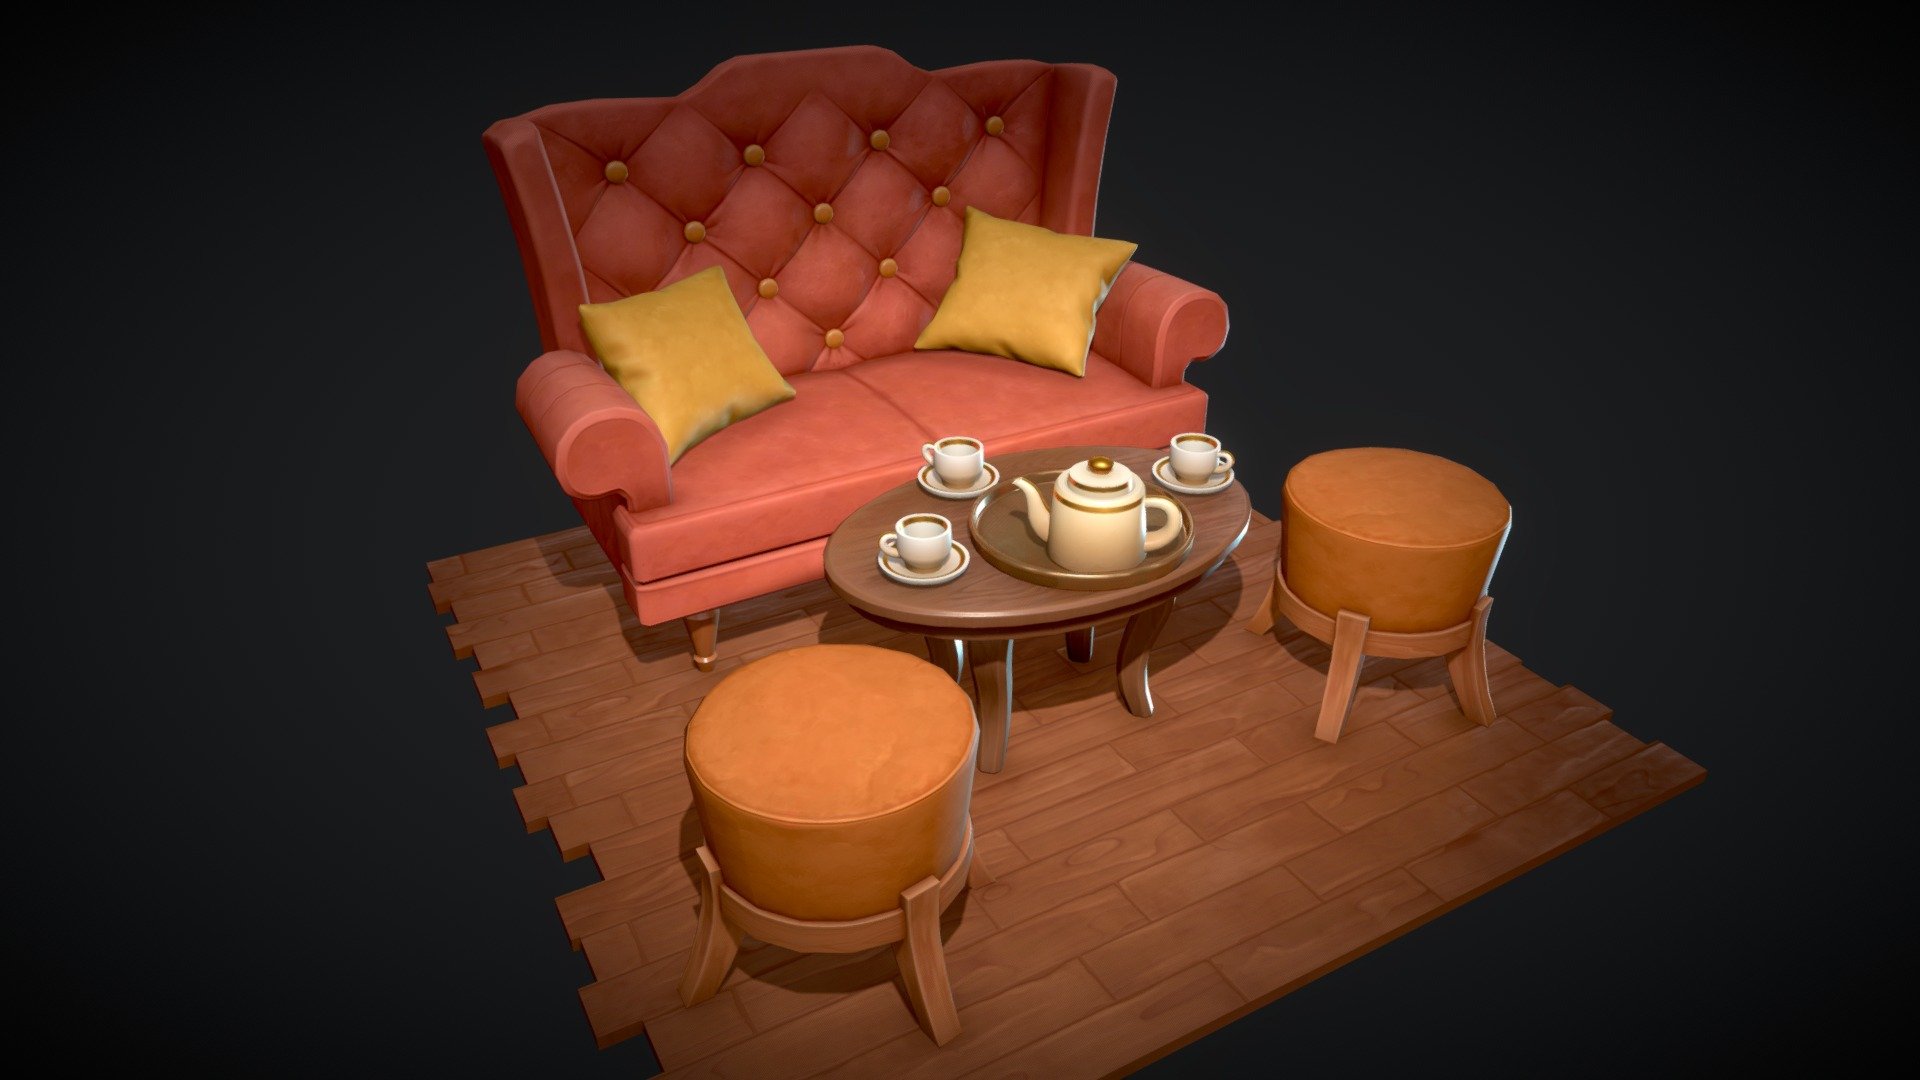 This is a part of my new package that will be available on Unity Asset Store in the near future 3d model